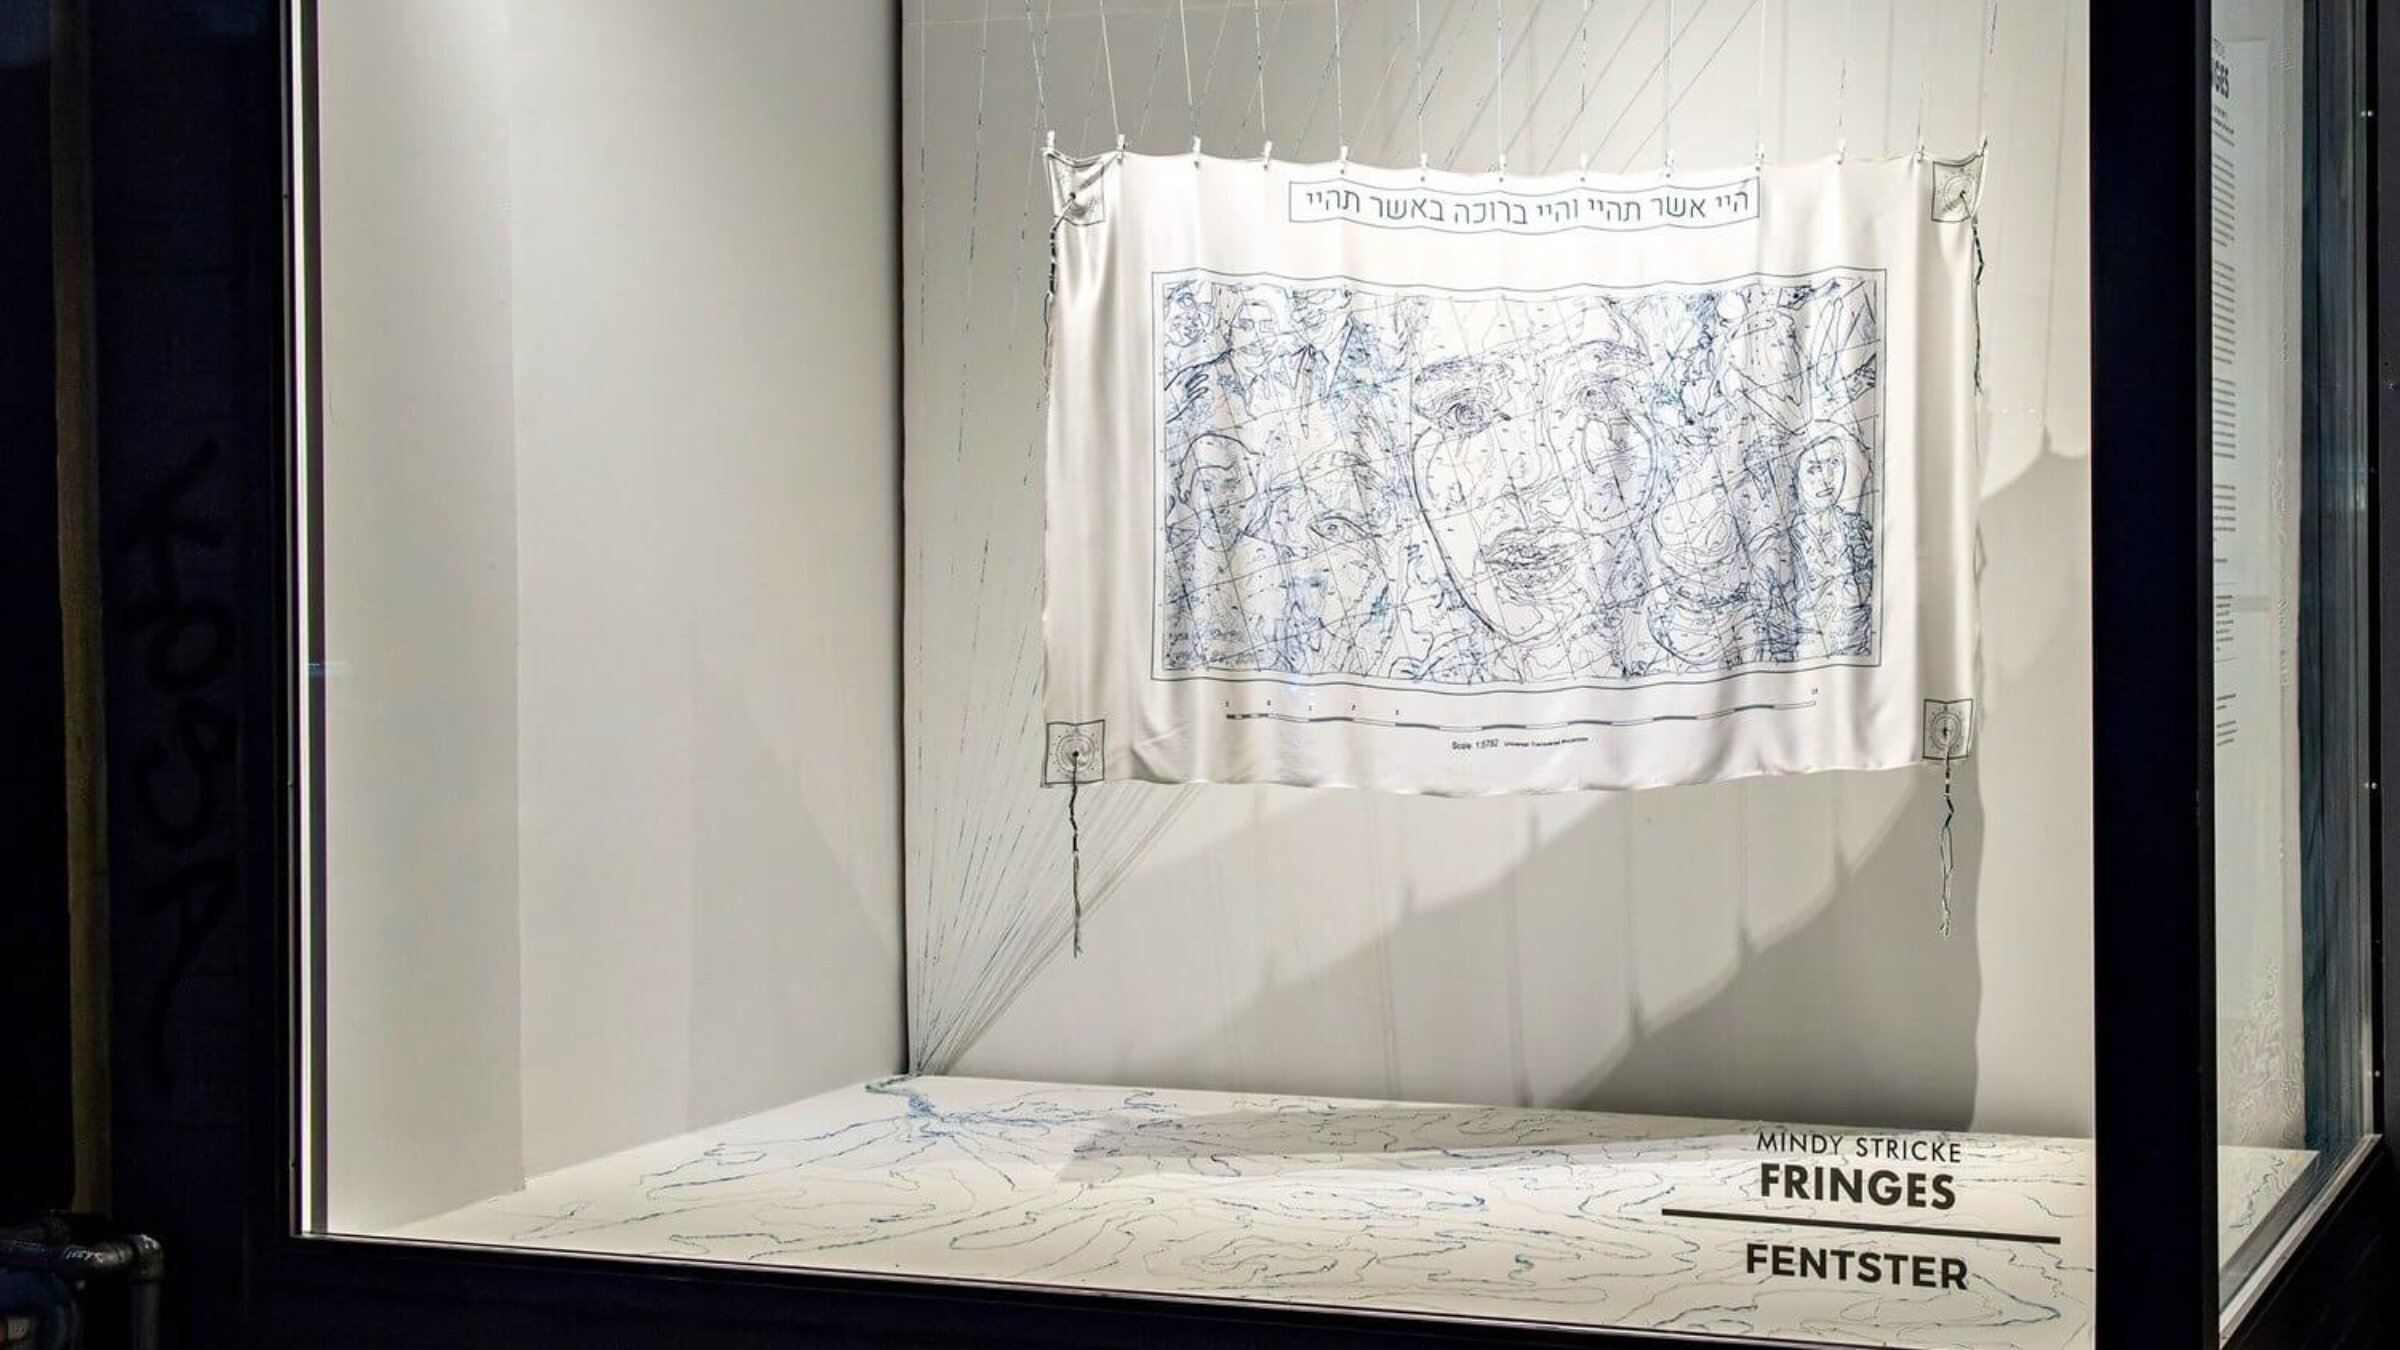 The tallit, installed in Fentster's window, creates another map with the fringes dangling onto the floor.